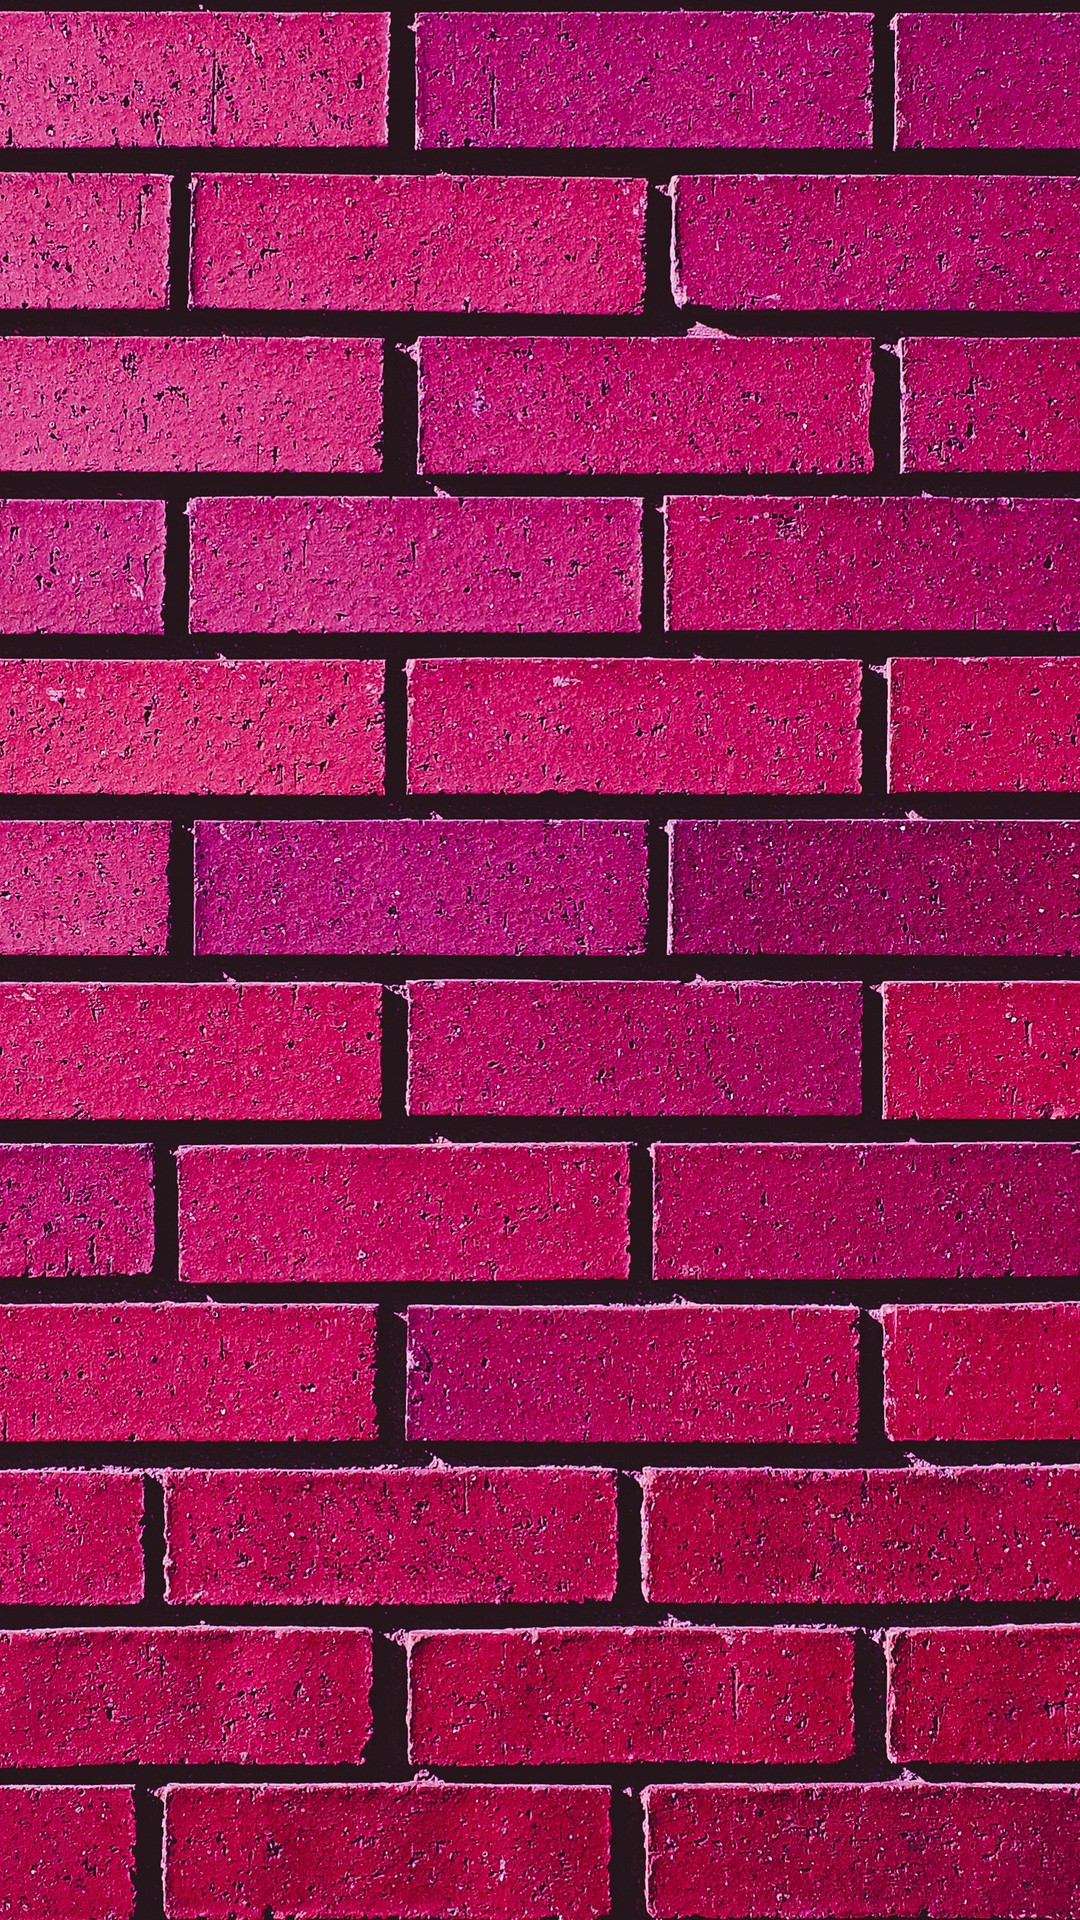 Brick Android Wallpaper with high-resolution 1080x1920 pixel. You can use this wallpaper for your Android backgrounds, Tablet, Samsung Screensavers, Mobile Phone Lock Screen and another Smartphones device